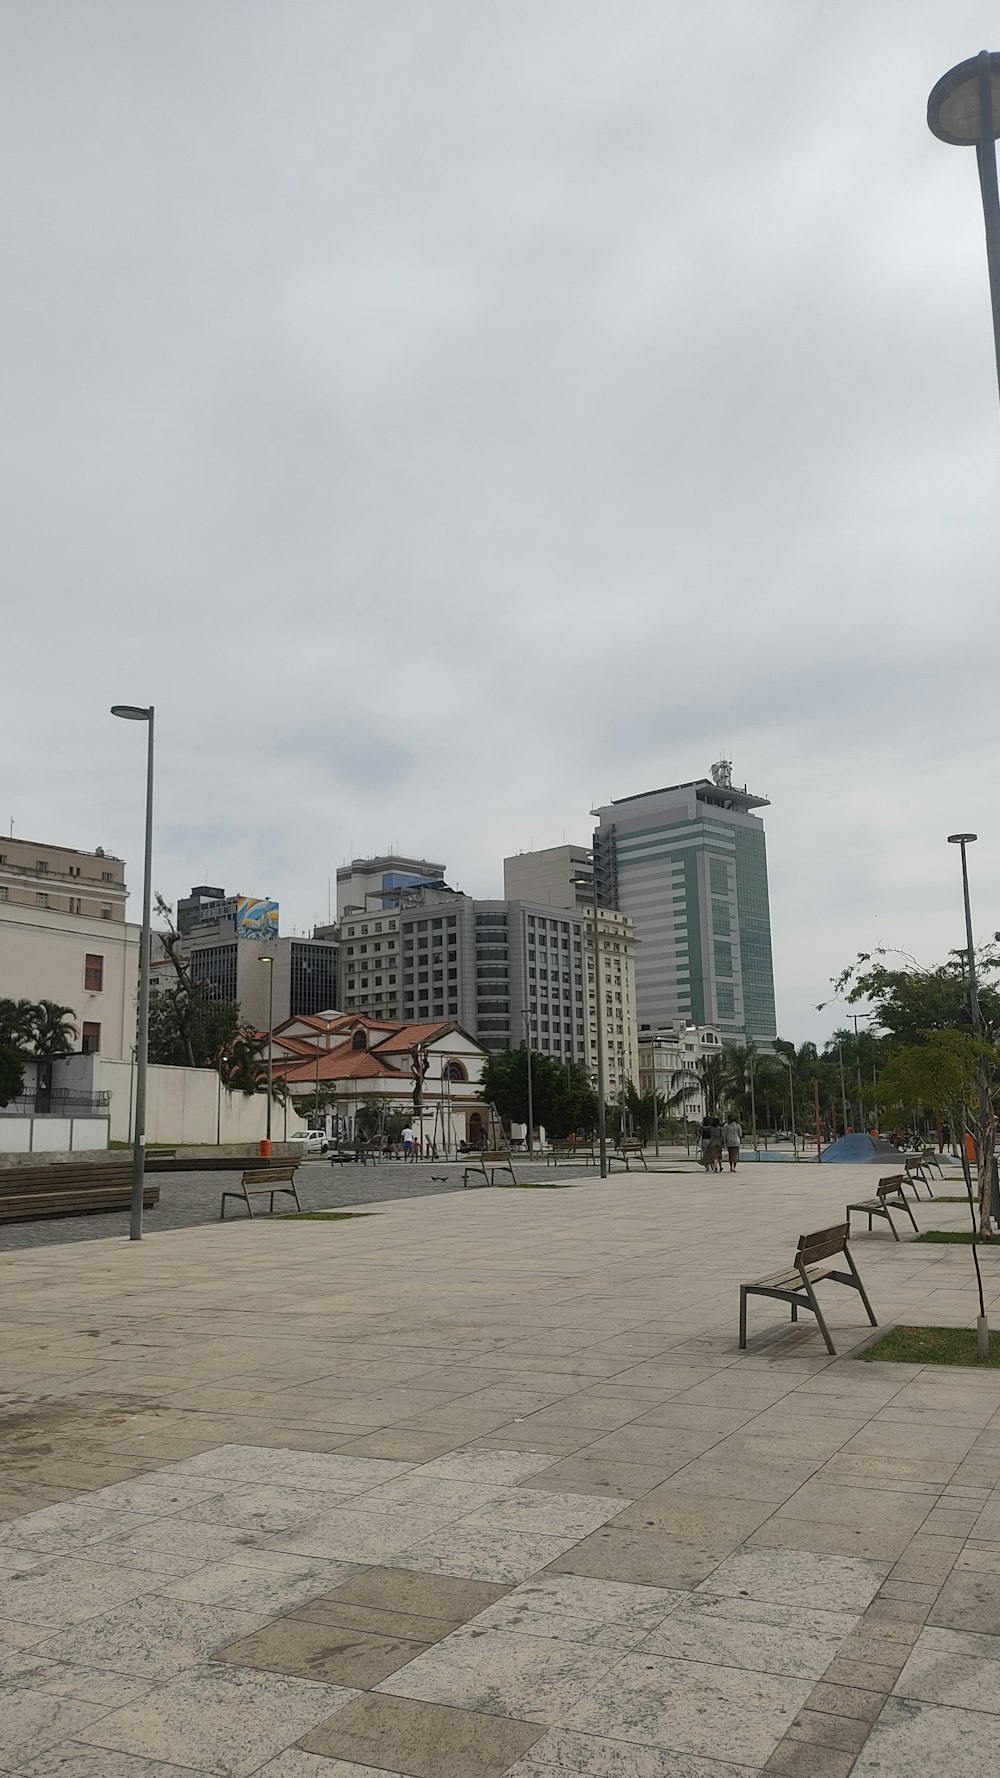 a park with benches and buildings in the background